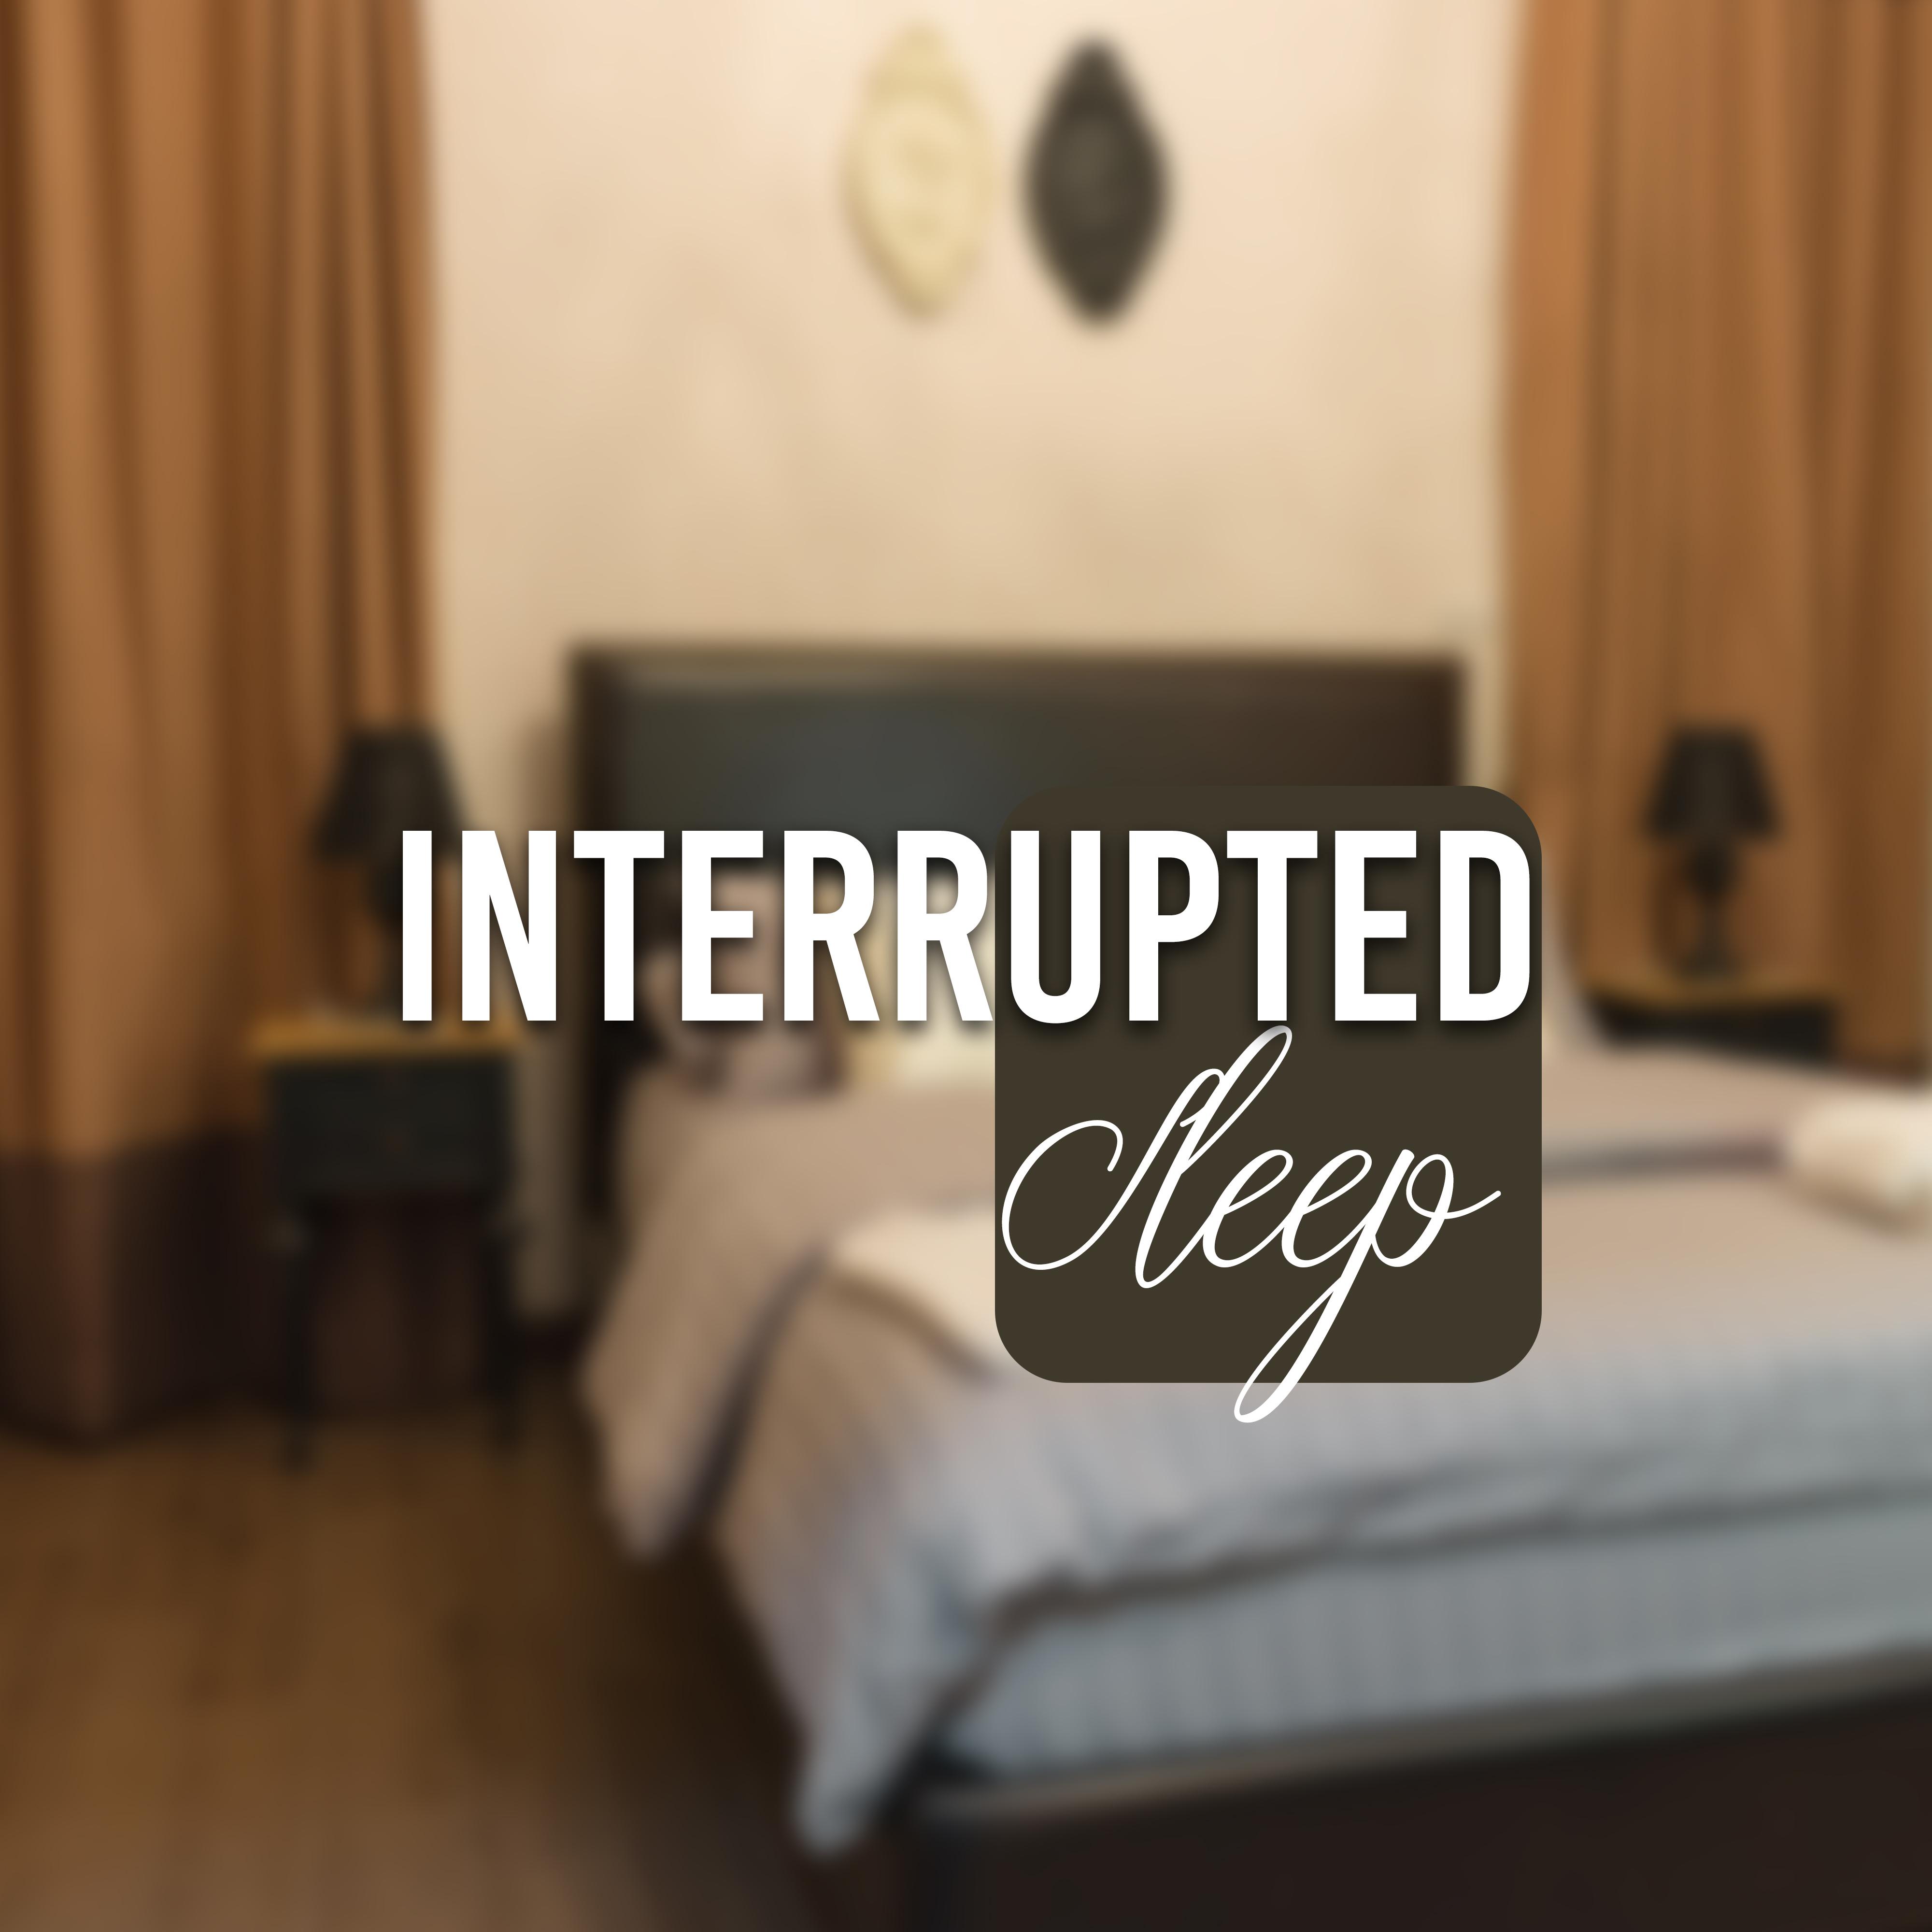 Interrupted Sleep: Calm, Quiet and Relaxing Music to Sleep Again